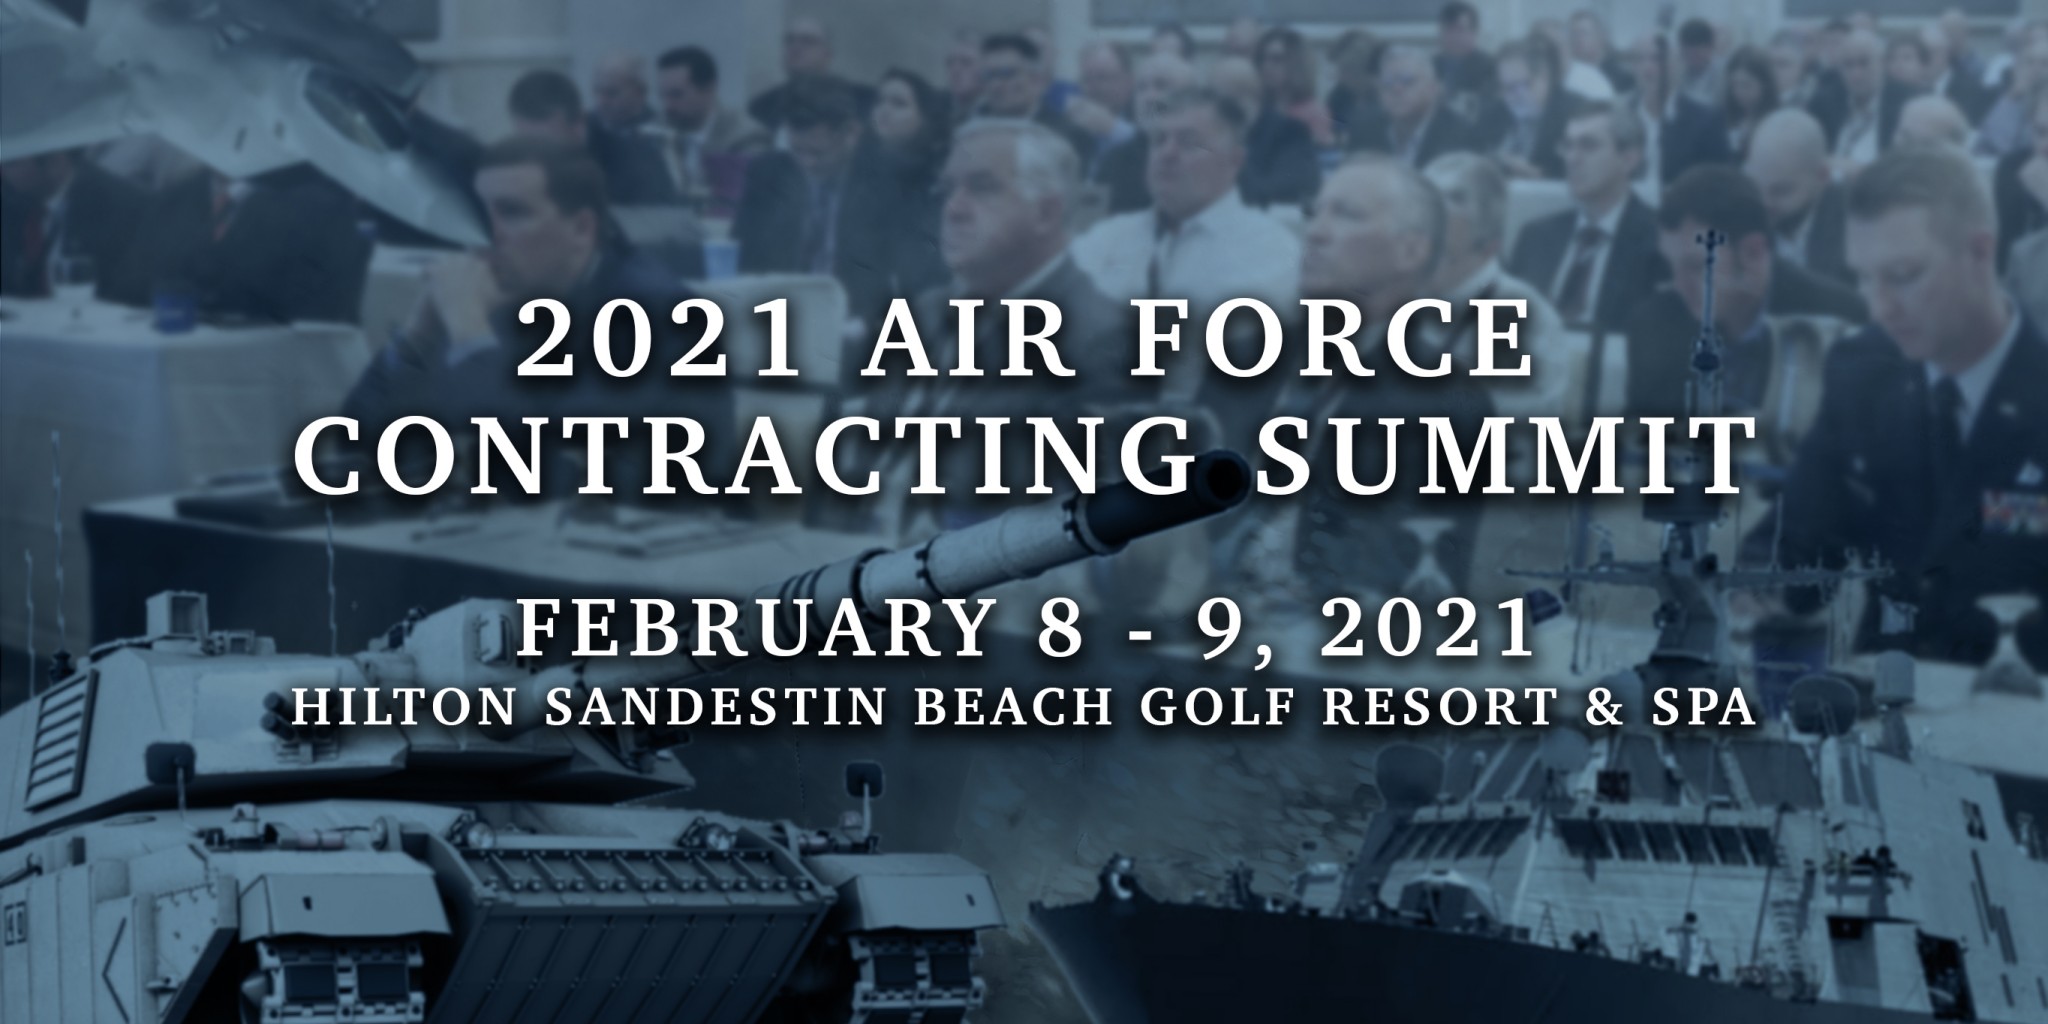 Air Force Contracting Summit 850 Business Magazine